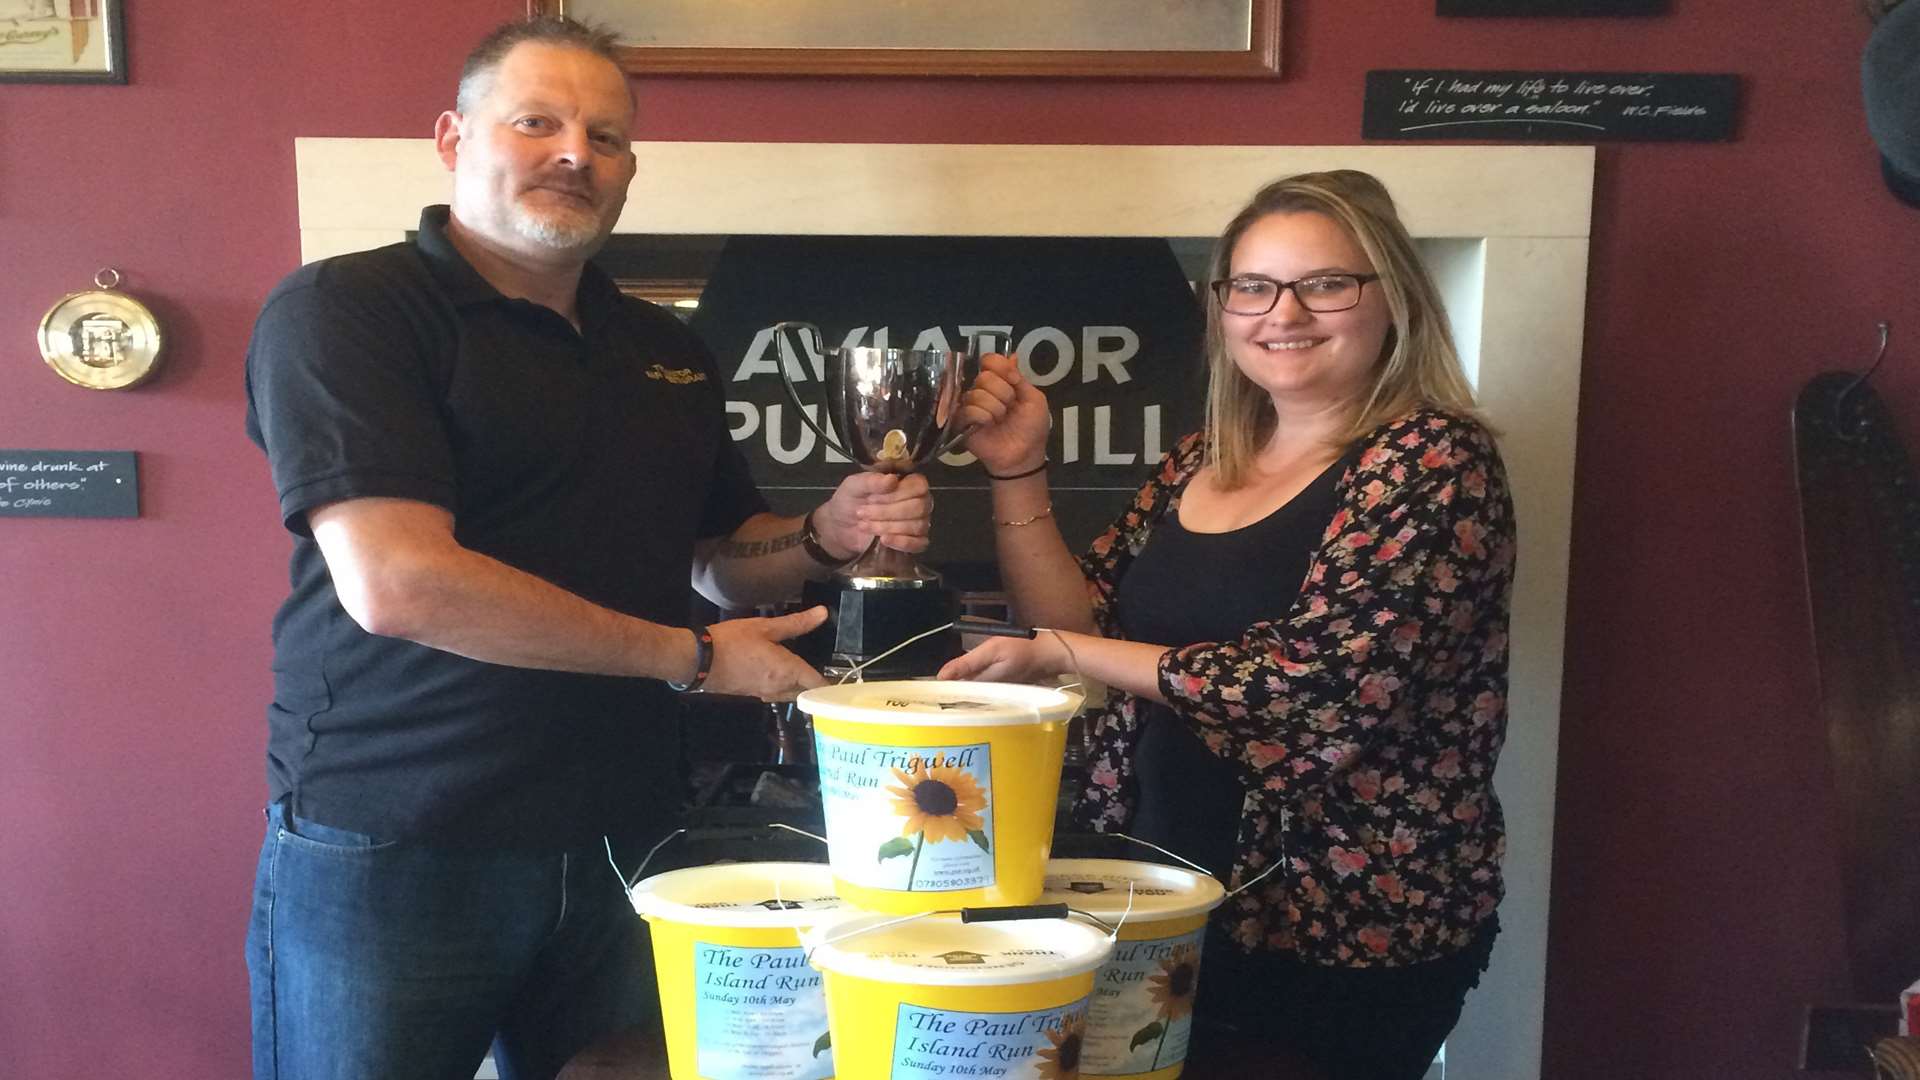 Phil Chislet, manager of the Aviator pub in Queenborough with Bethan McIntosh at the launch of the Paul Trigwell Island Run Bucket Challenge.